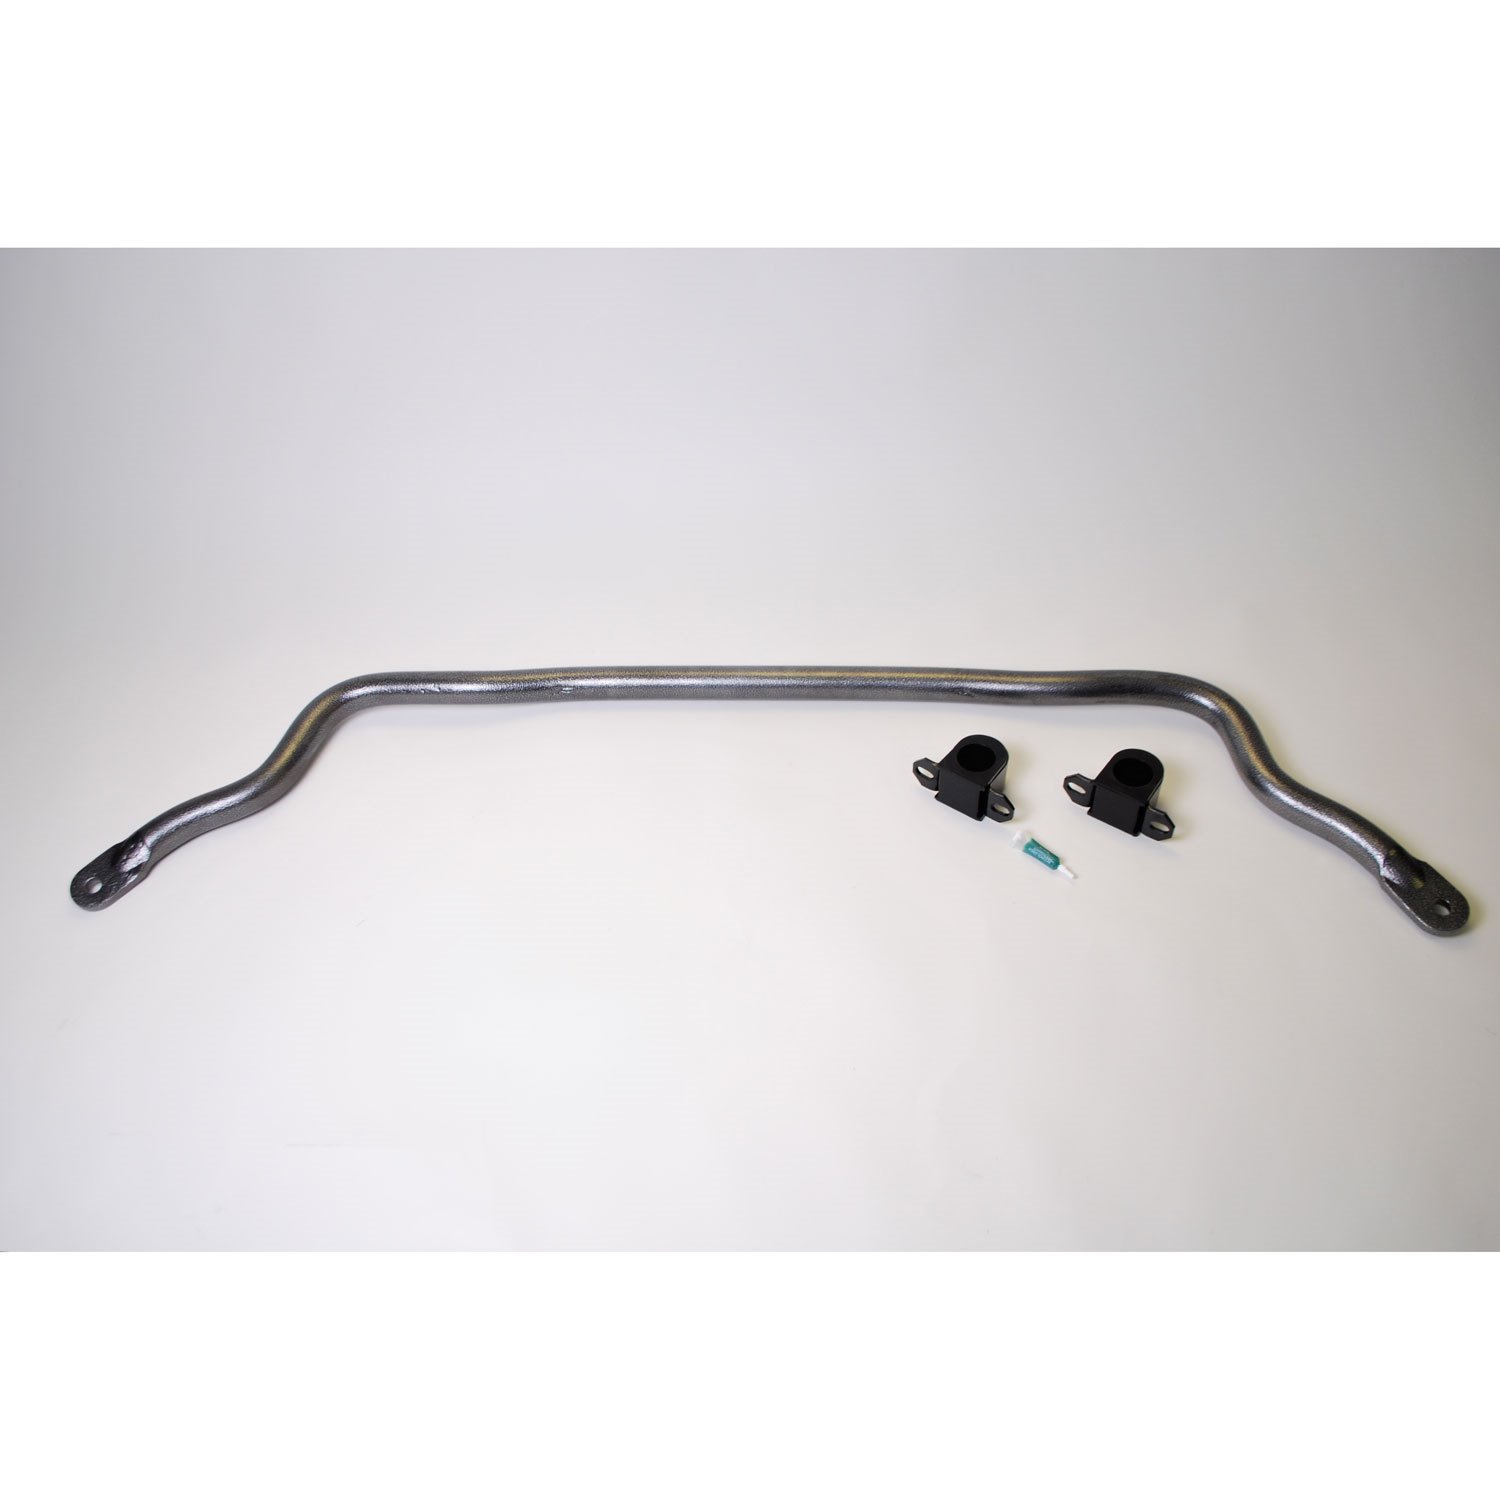 Front Sway Bar for 2009-2016 Dodge Ram 1500 2WD